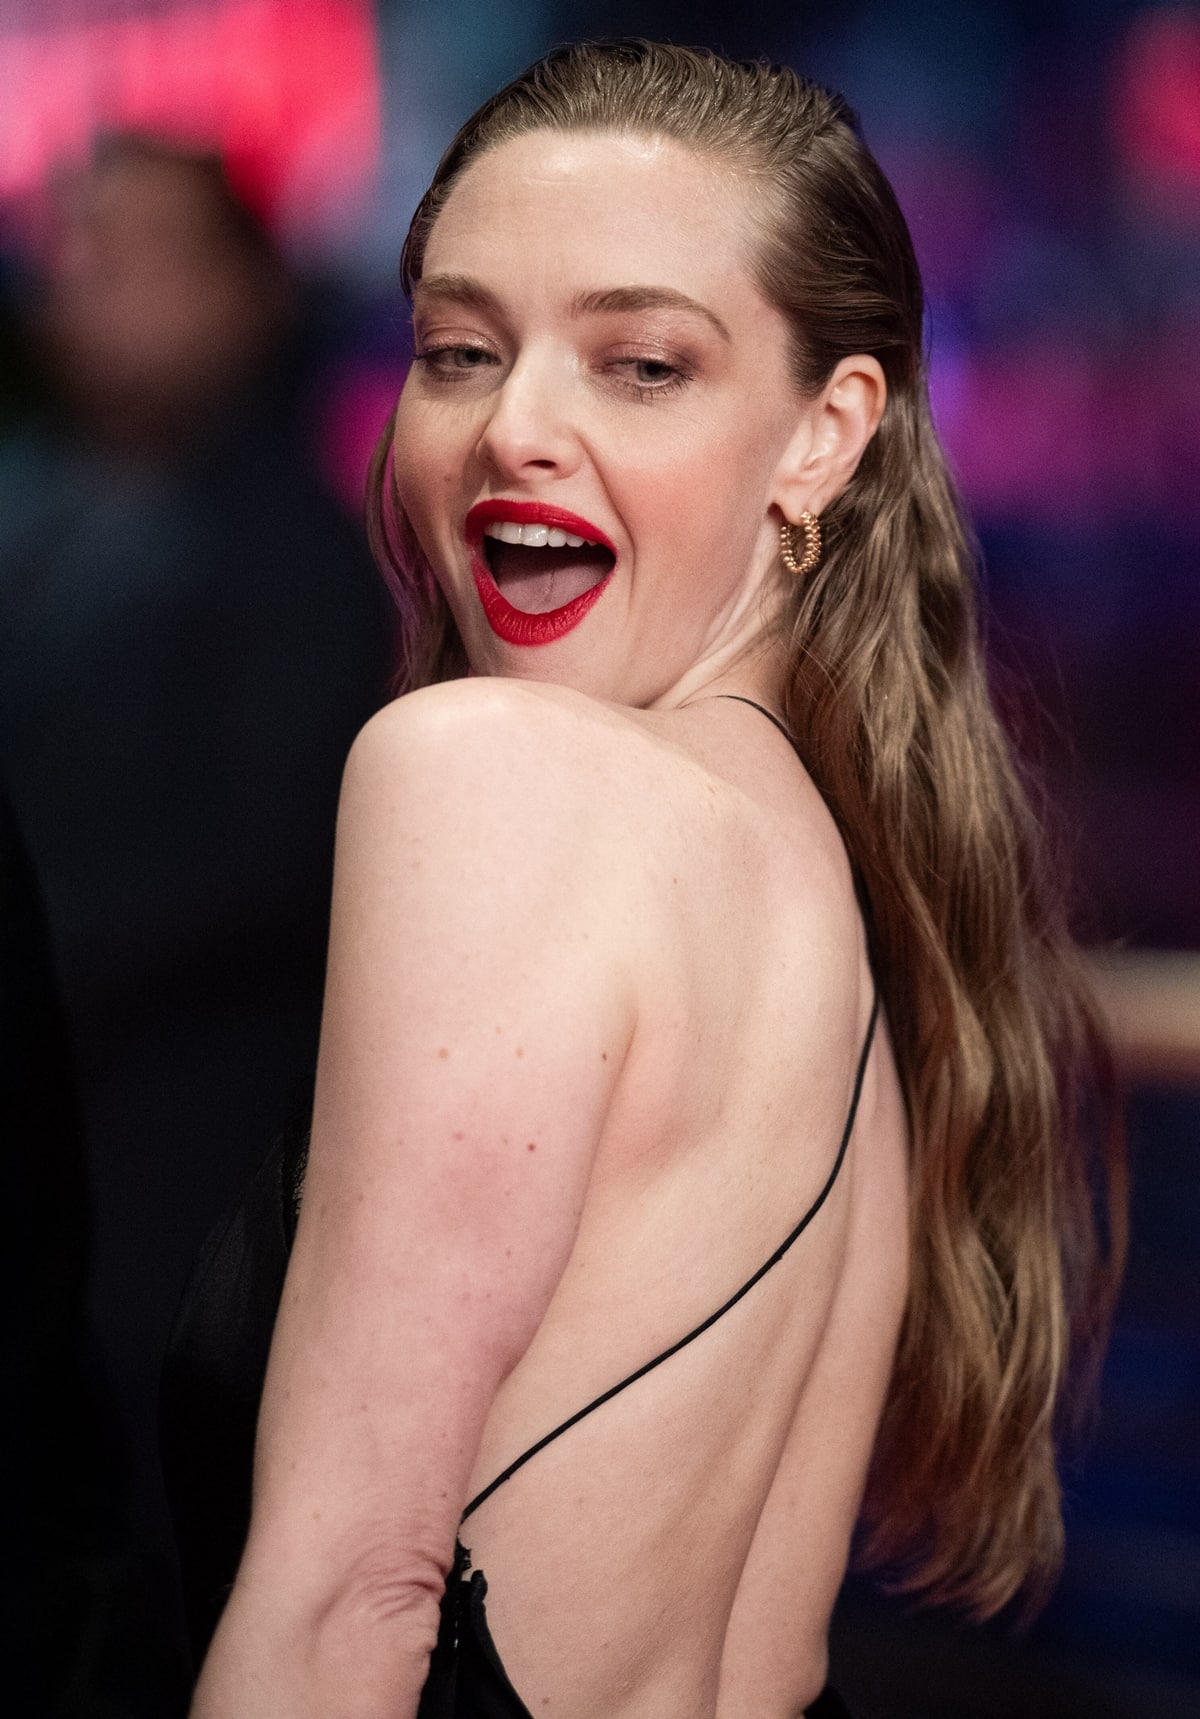 The backless design highlights Amanda Seyfried's sculpted back, while a halter neckline with intricate lace paneling adds elegance